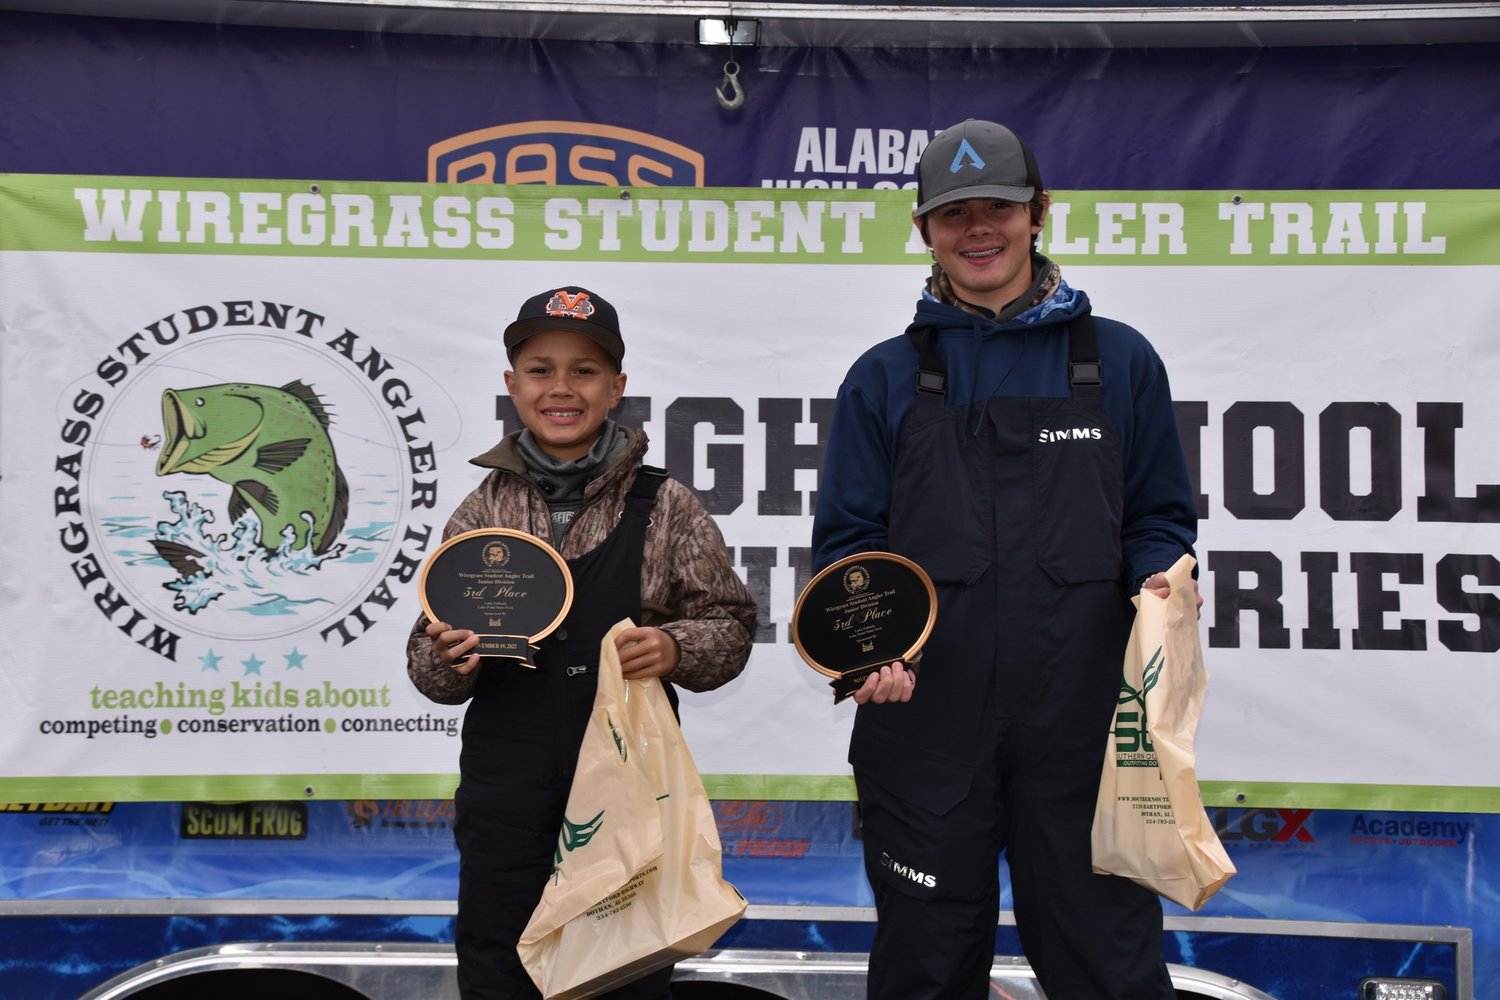 Hunter Robertson and Wyatt Lee hold their third-place plaques from the Wiregrass Student Angler Trail’s season finale tournament on Lake Eufaula last Saturday, Nov. 19. The pair hauled in two fish for 4.44 total pounds.